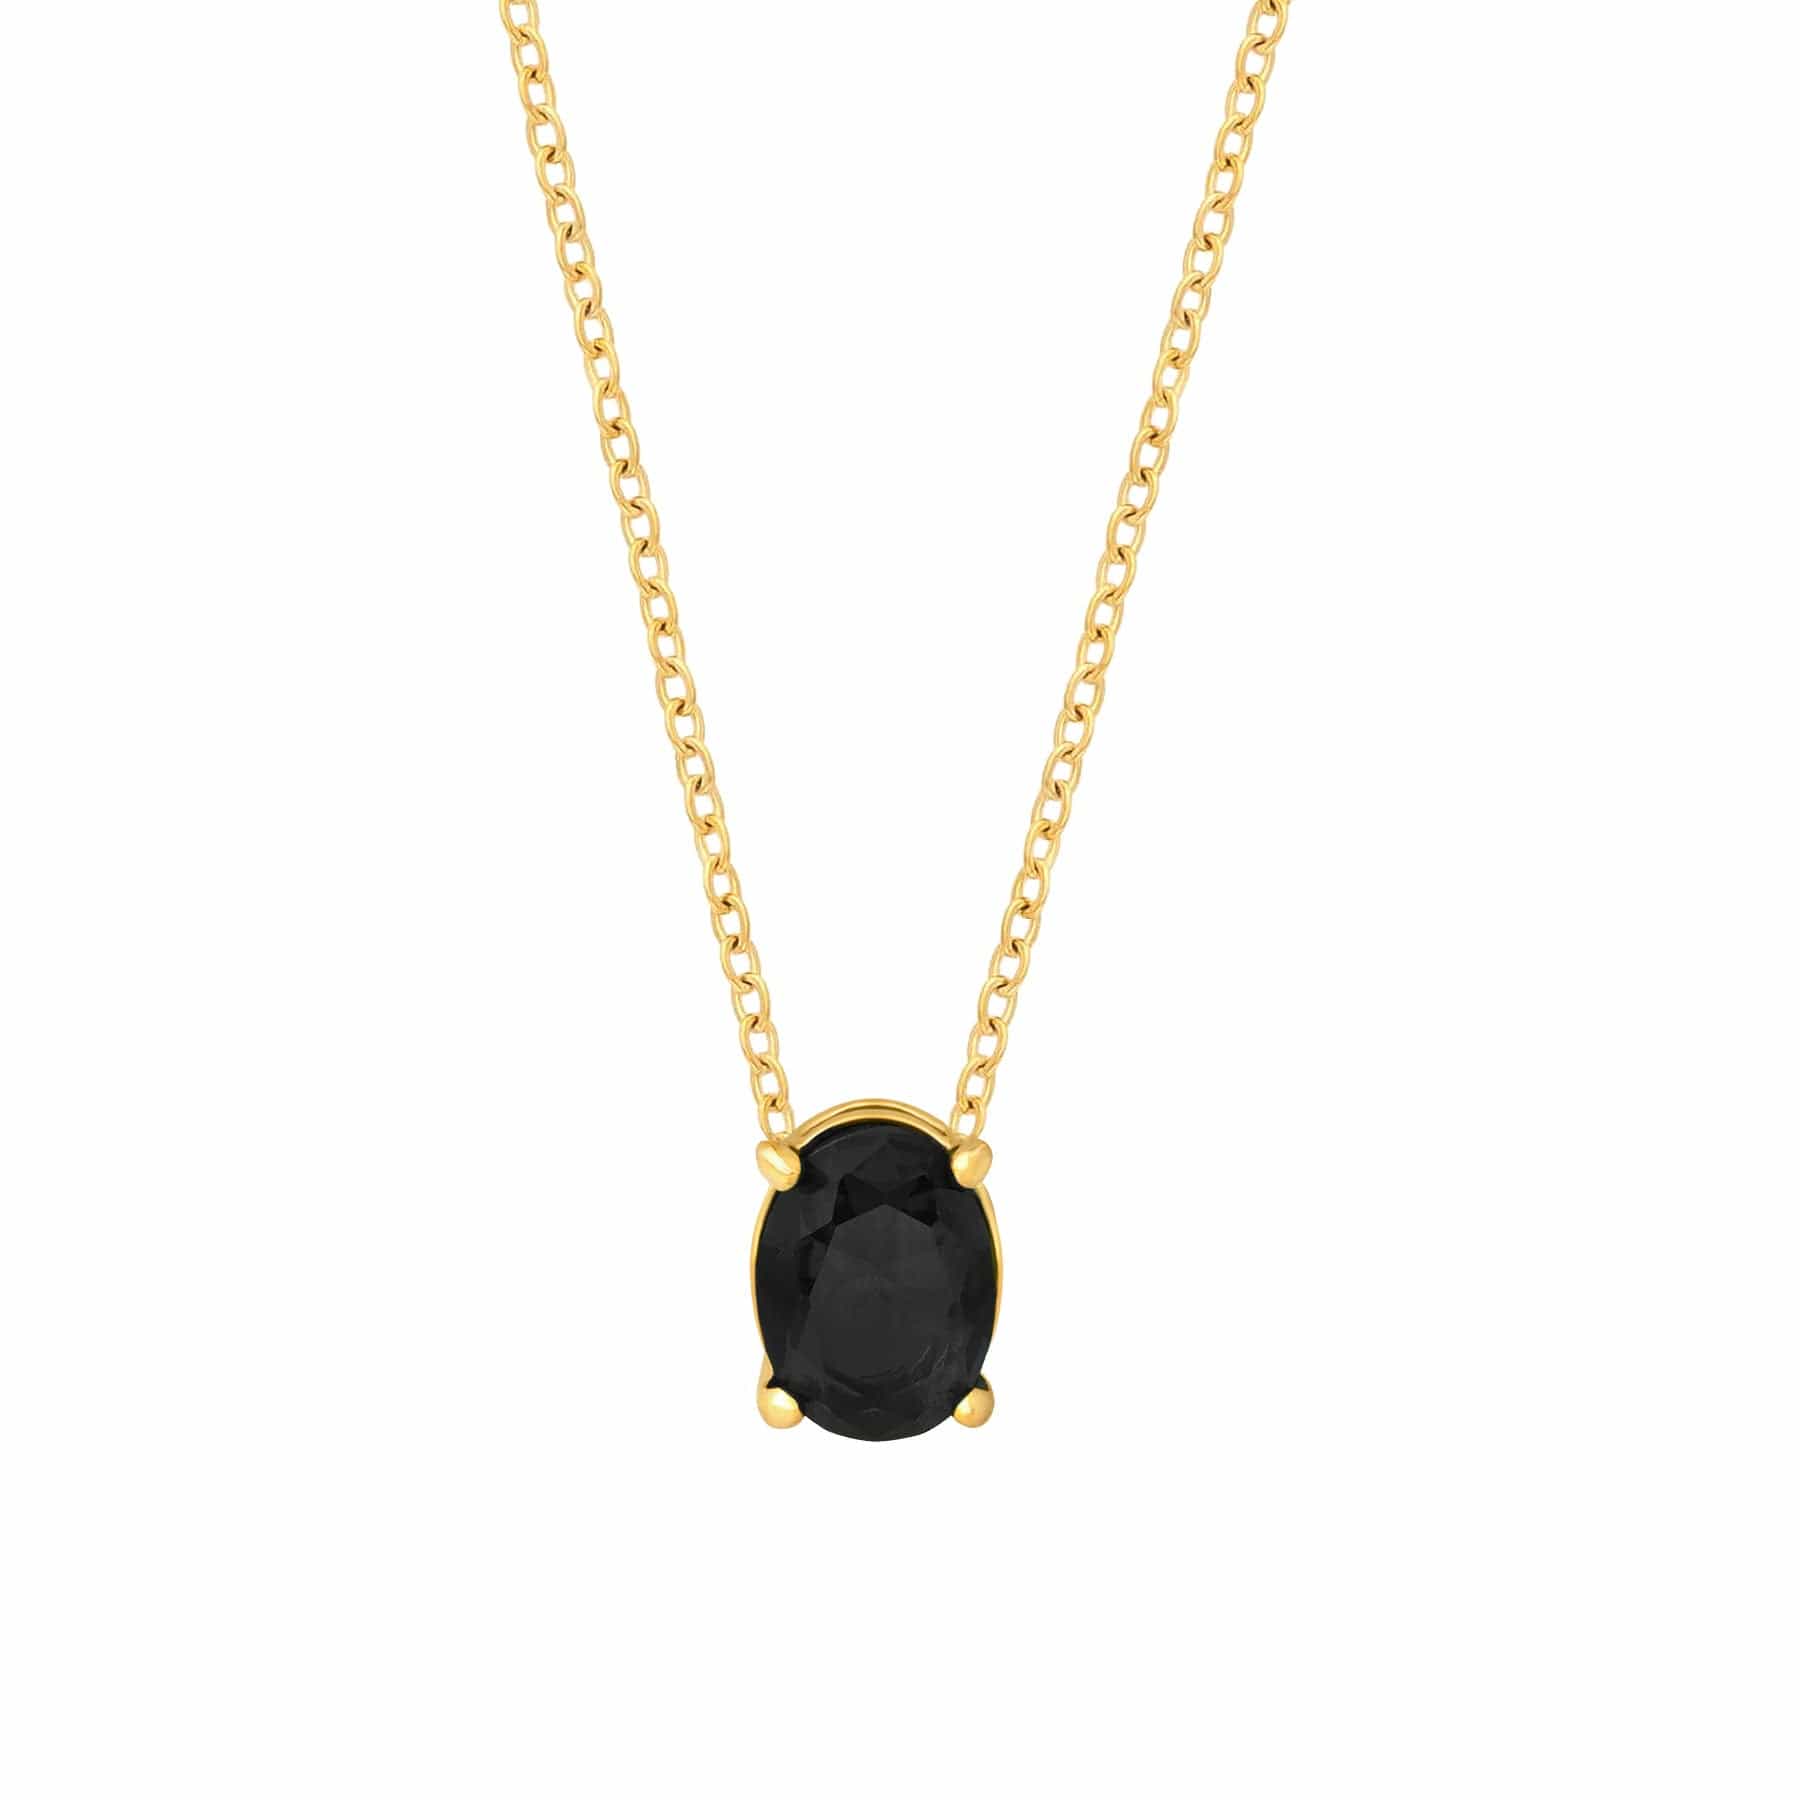 BohoMoon Stainless Steel Maia Necklace Gold / Black